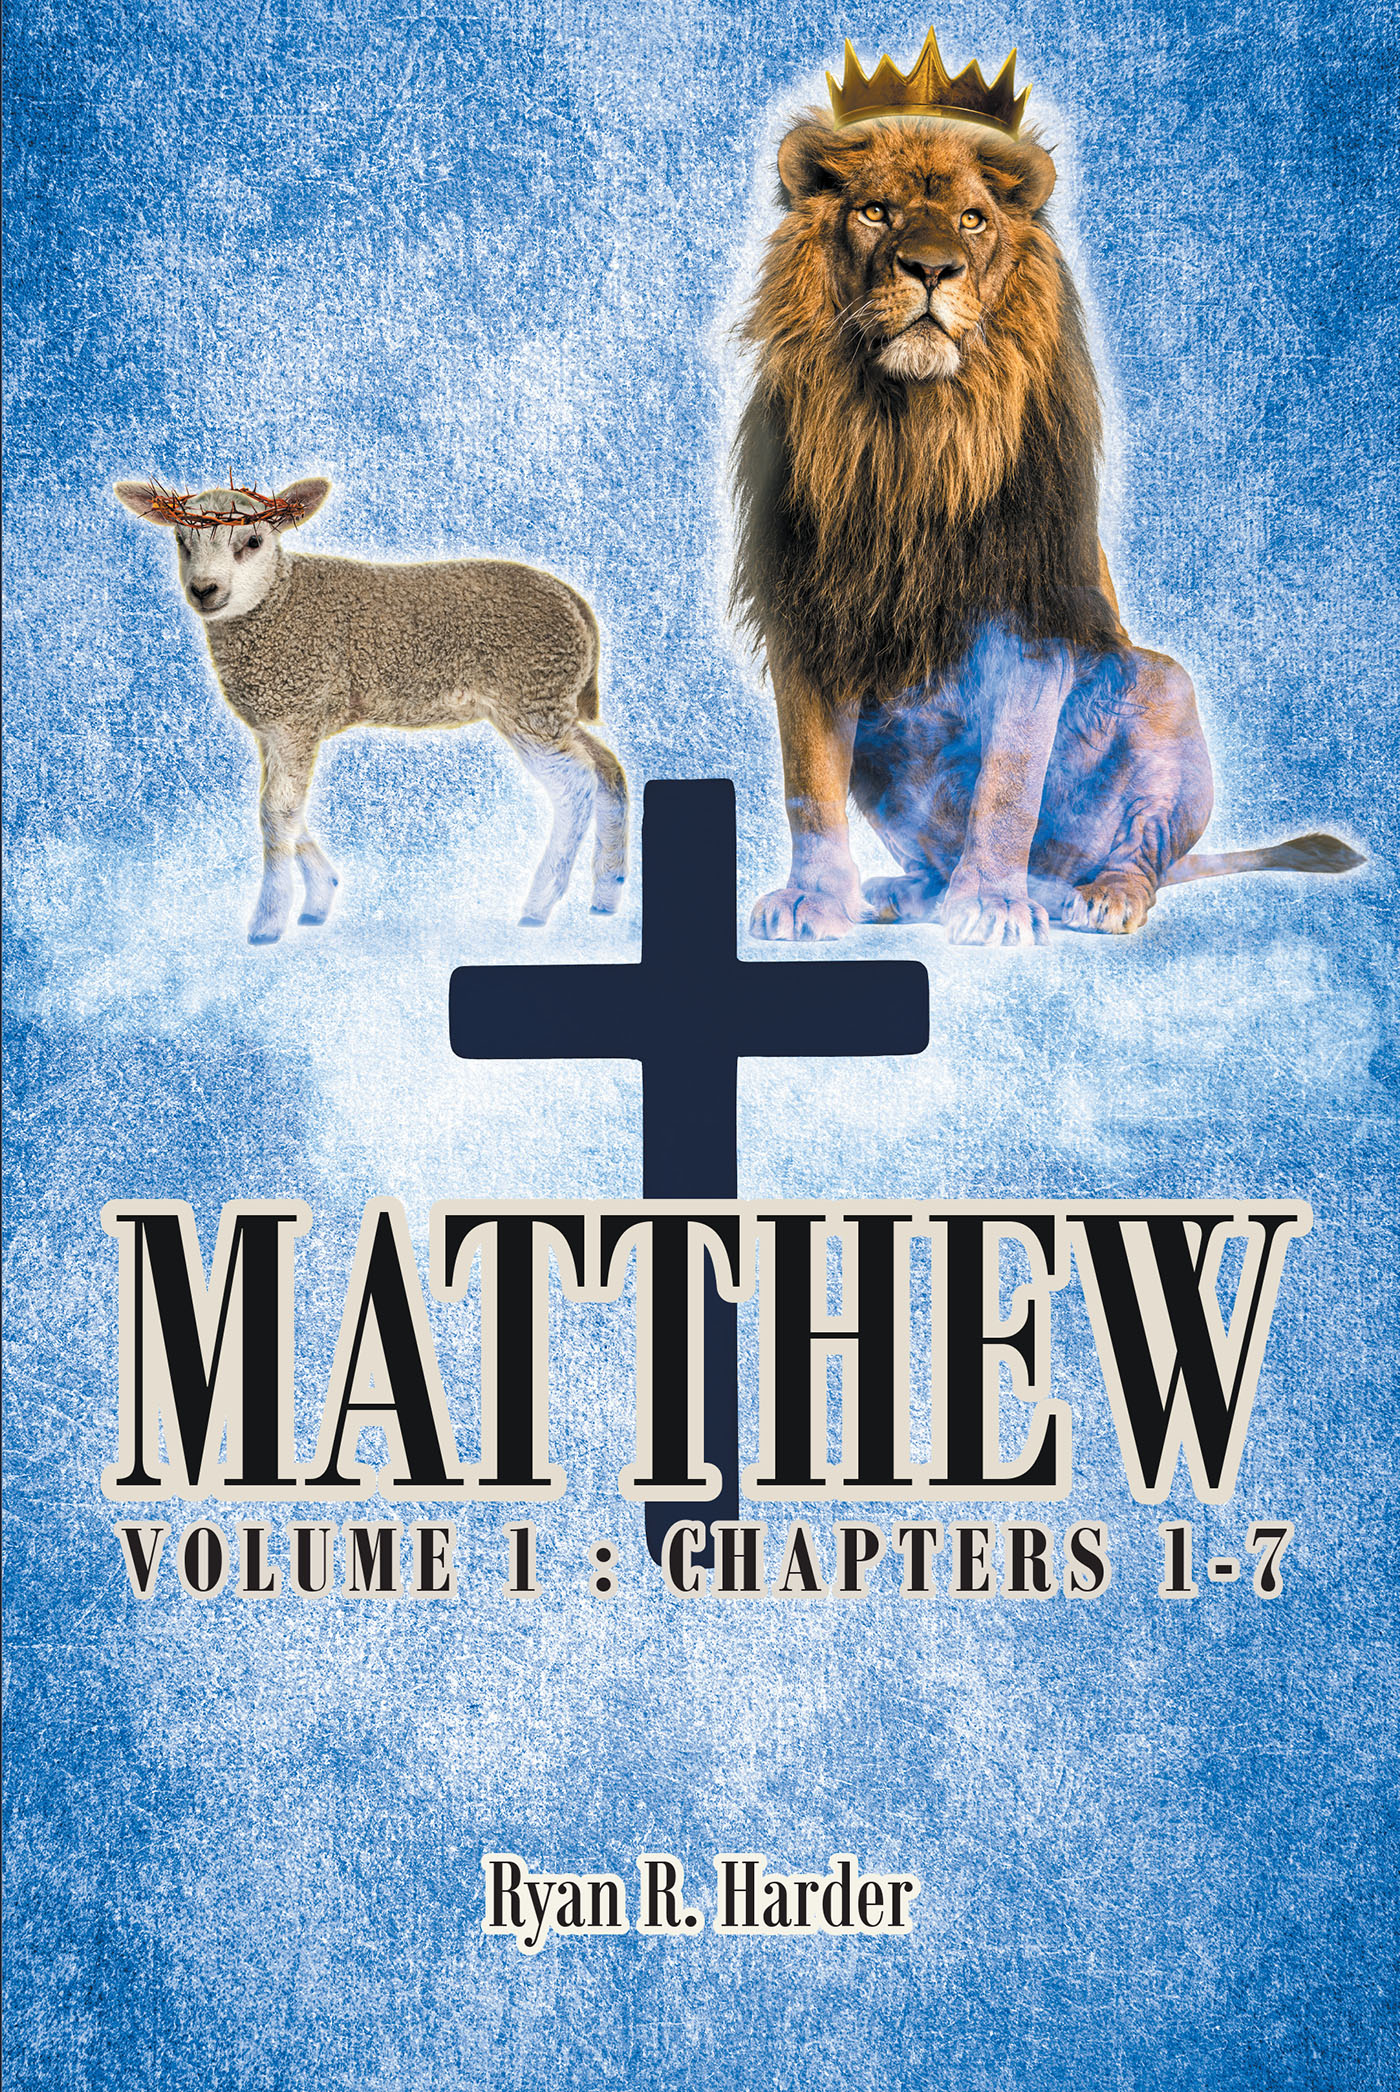 Author Ryan R. Harder’s New Book, “Matthew Volume 1: Chapters 1-7,” is an Insightful Guide to the Lord's Holy Word Designed to Help Readers Strengthen Their Faith